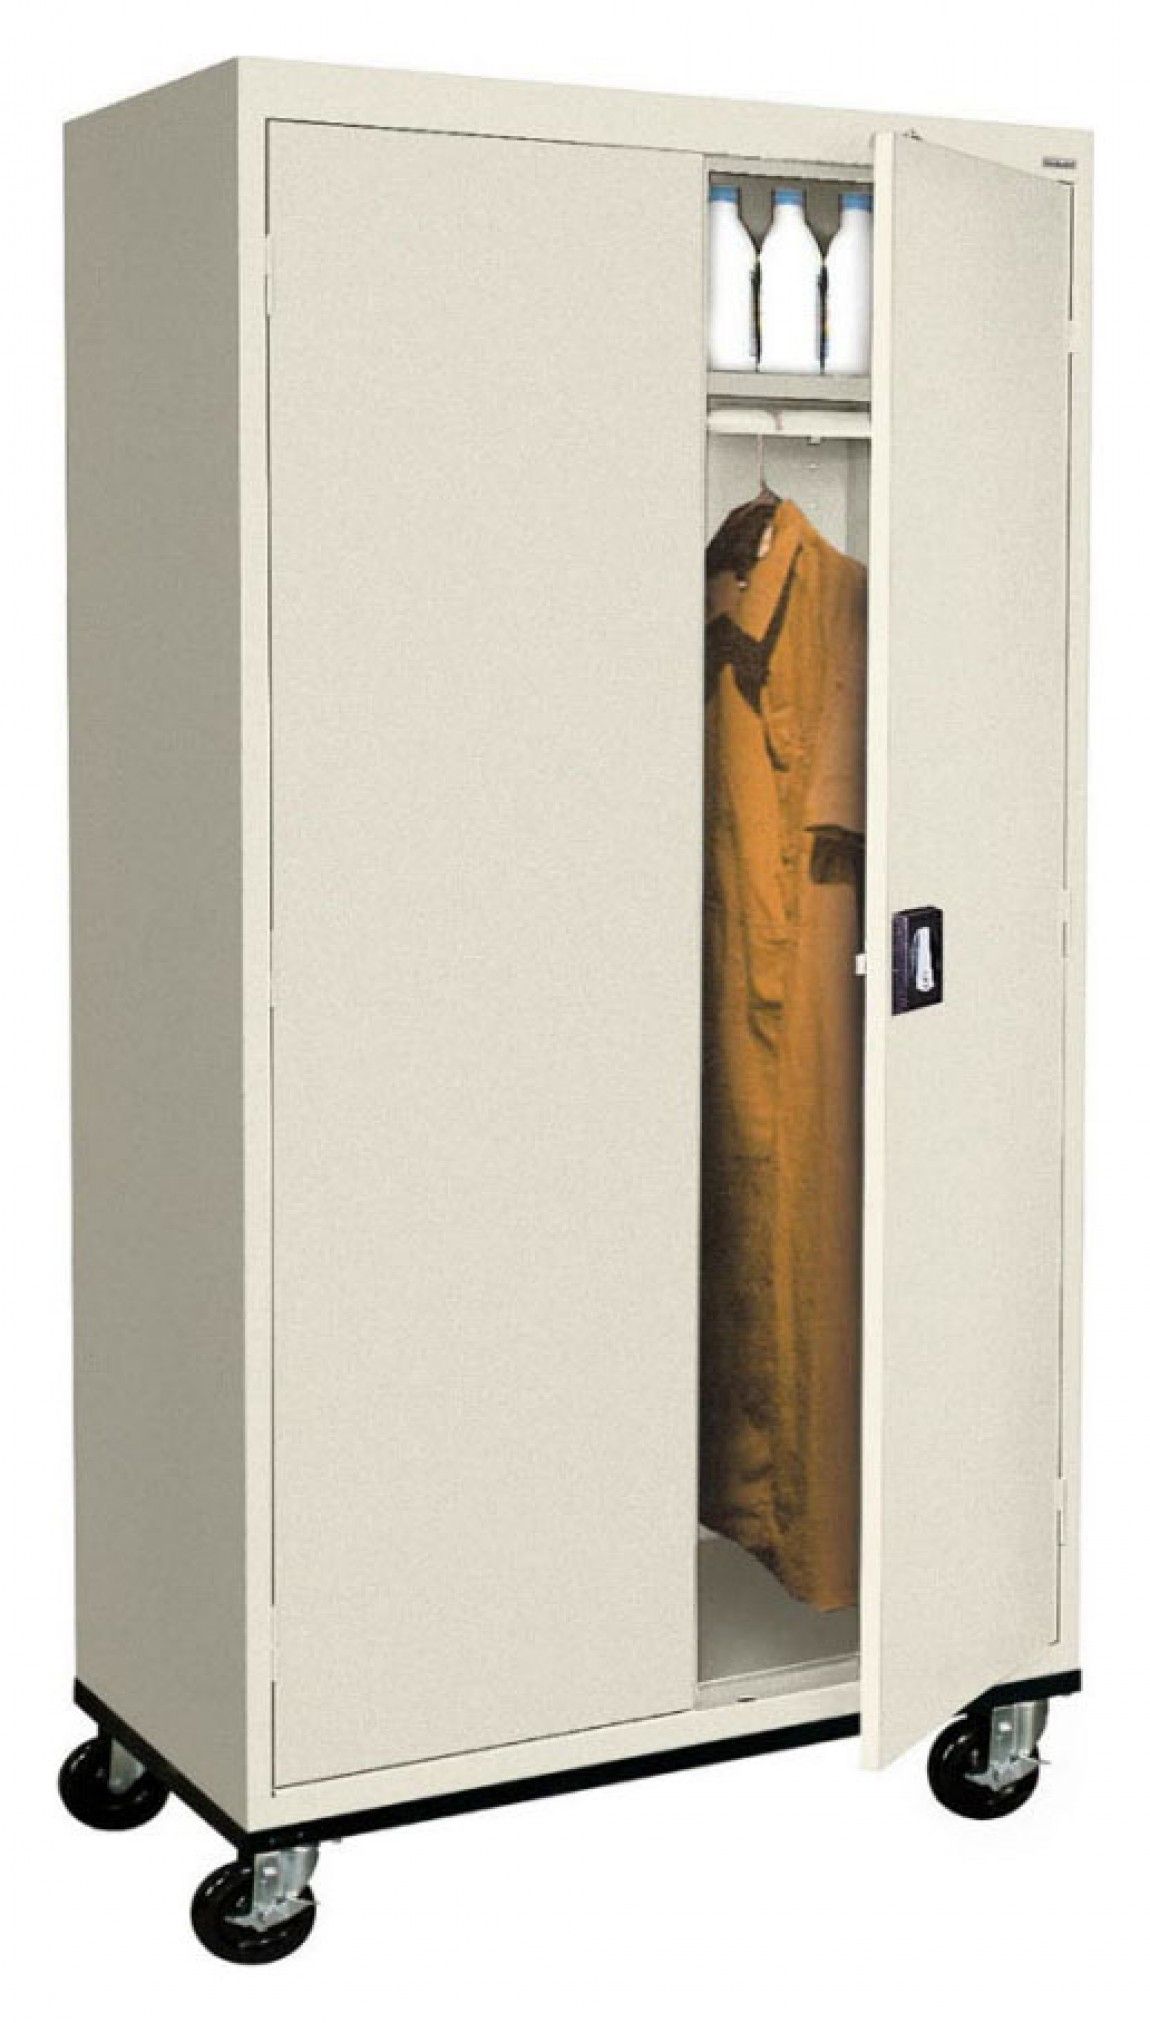 Putty Mobile Wardrobe Storage Cabinet 46" X 24" X 78" : Tawr462472    –  Mobile Transportsandusky | Madison Liquidators With Mobile Wardrobes Cabinets (View 5 of 15)